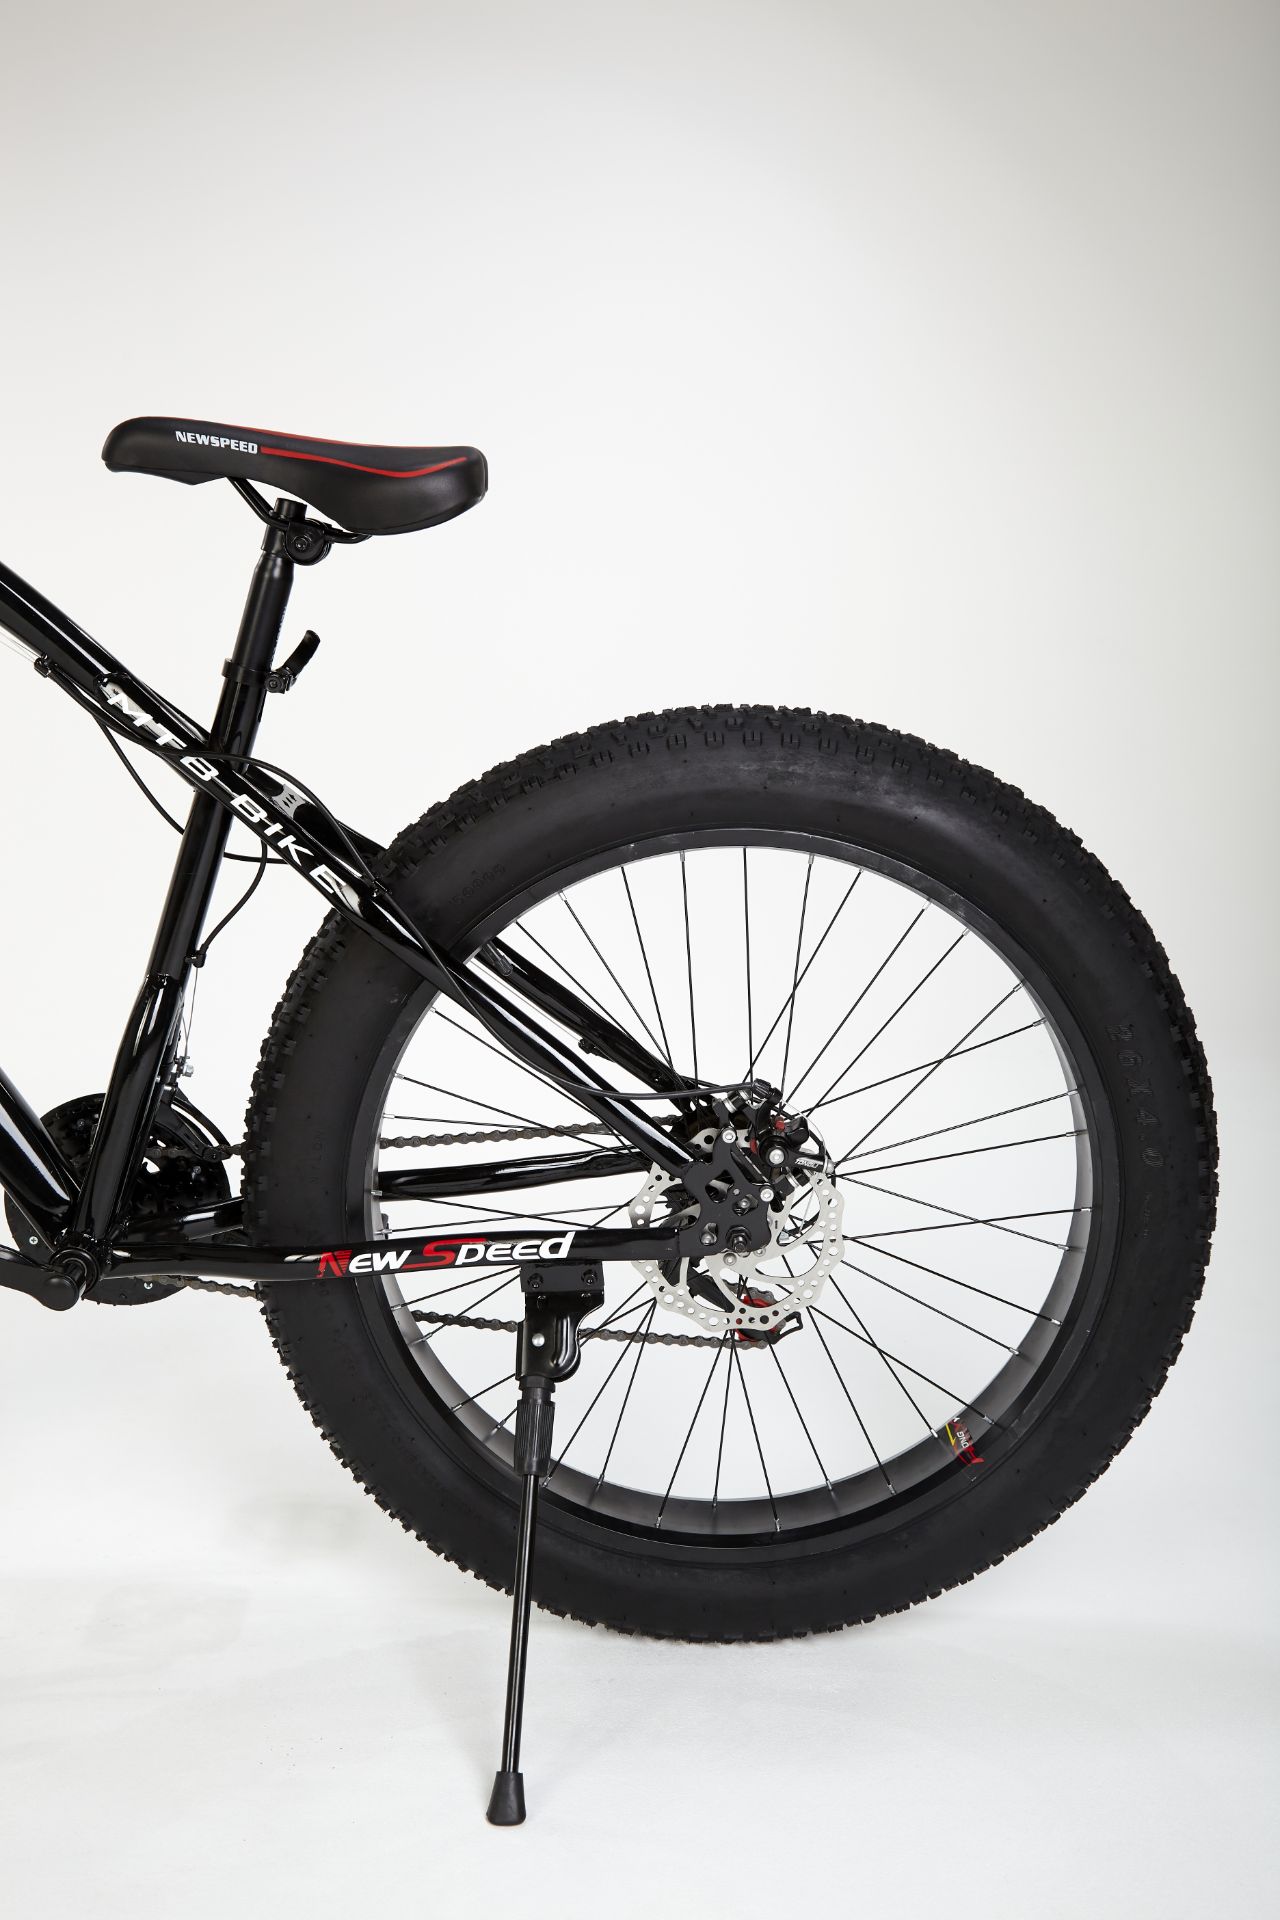 MOUNTAIN BIKE BICYCLE MEN/WOMEN FAT TIRE 26" WITH FRONT SUSPENSION - BLACK (04) - Image 5 of 12